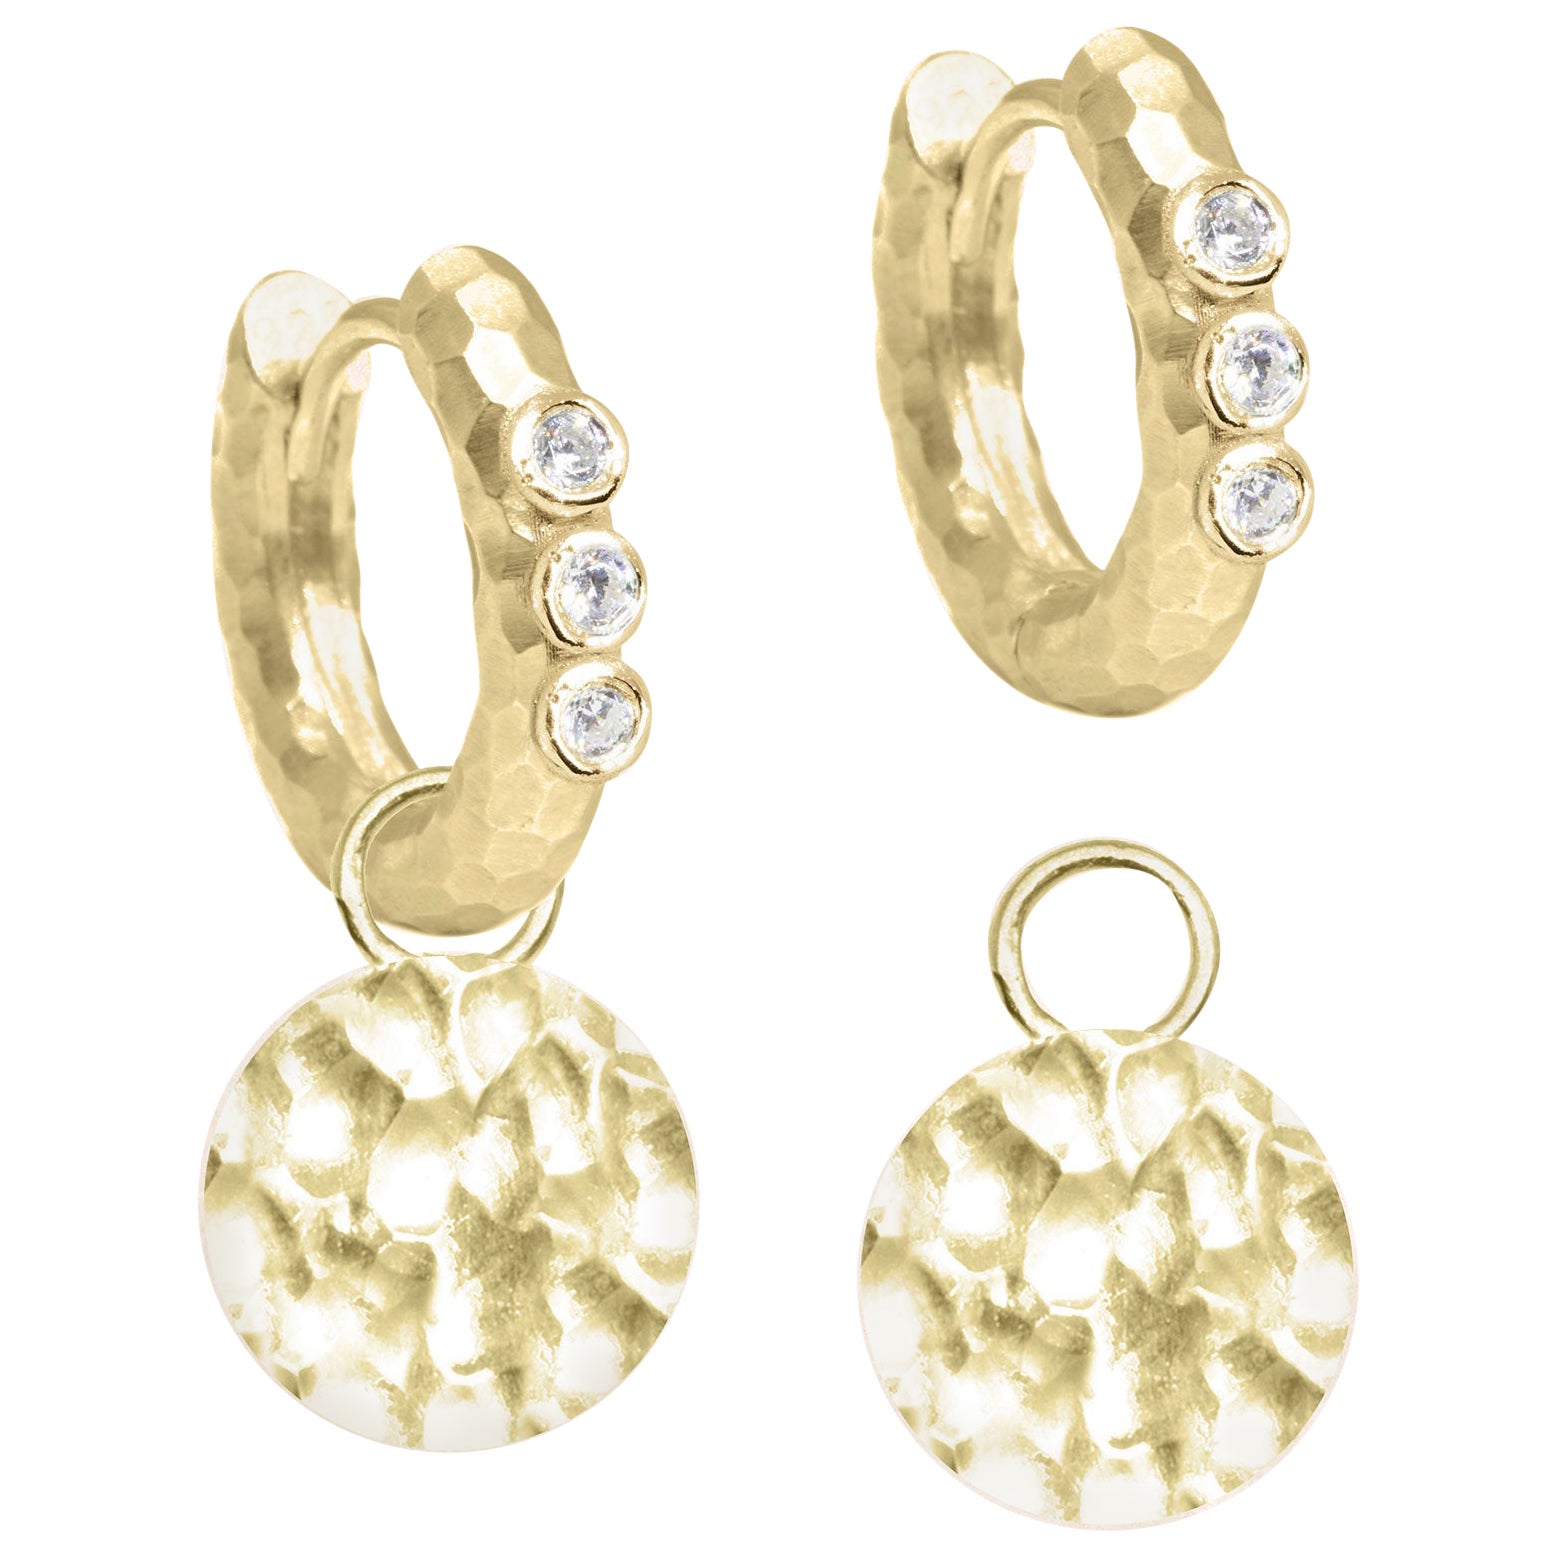 Forged Round Gold 18k Earring Charms